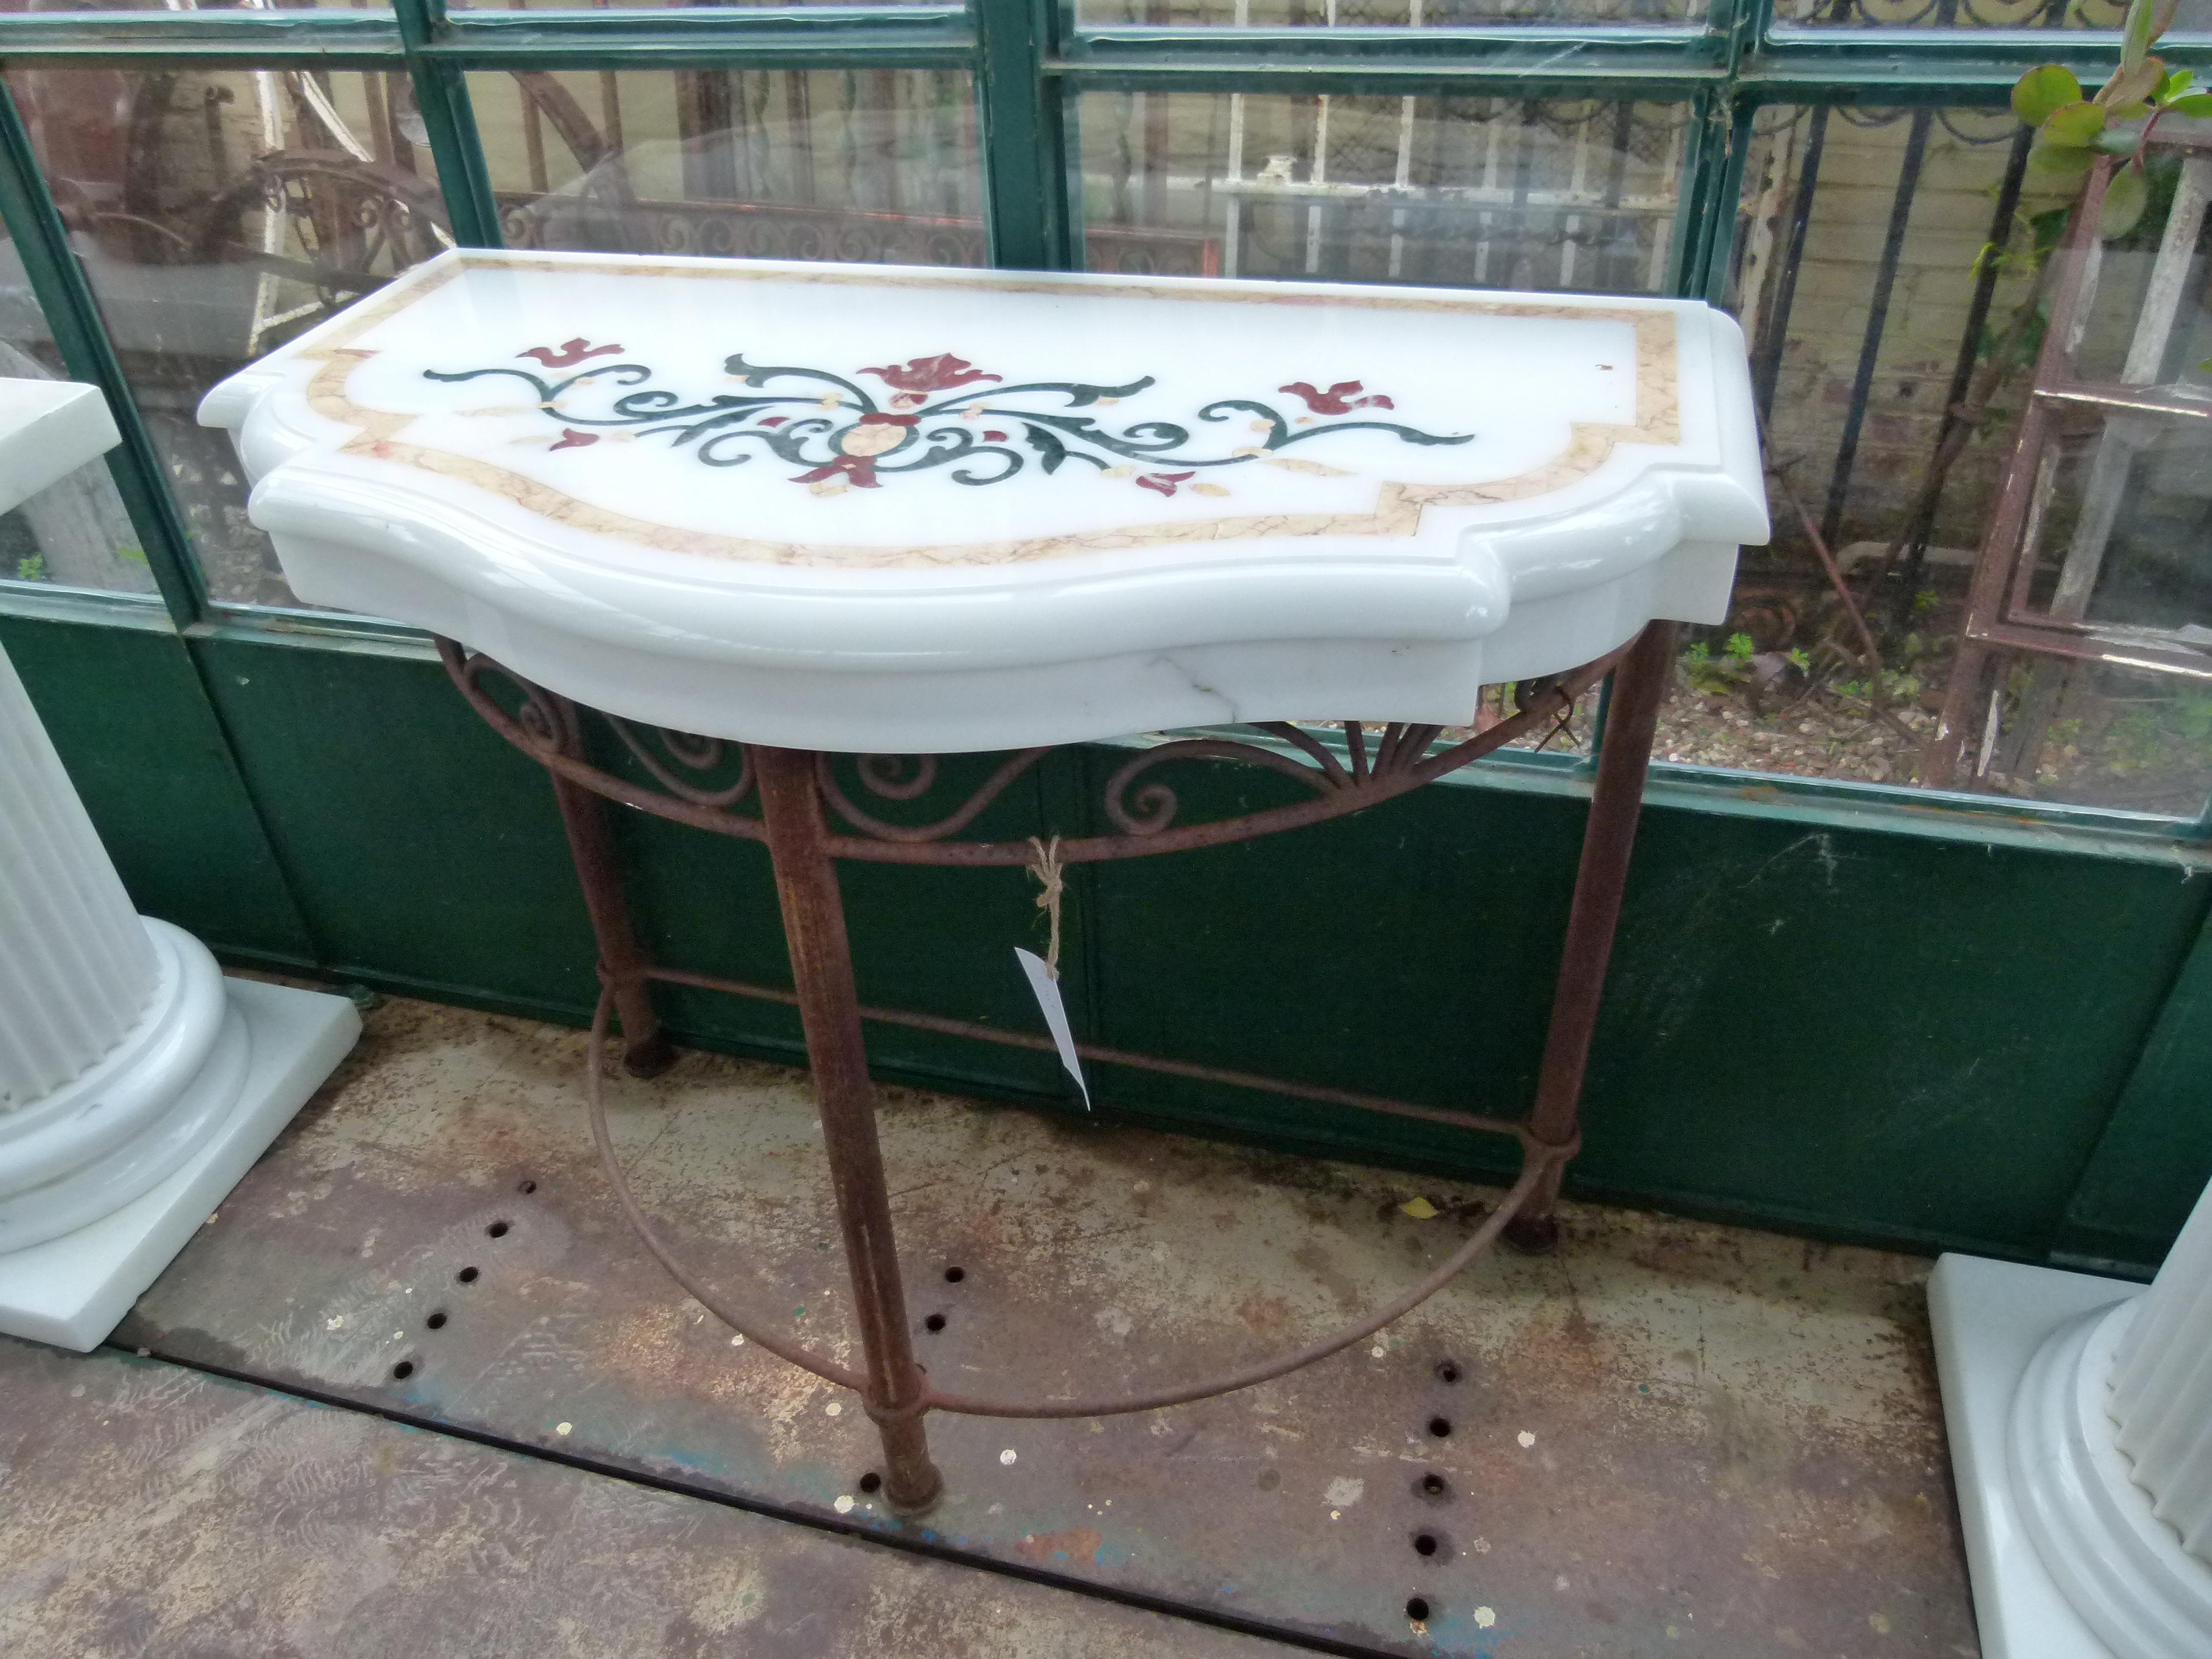 20th Century white marble Spanish console.
Marble Inlaid with colored decorative flowers, 
Stabil wrought iron feet.